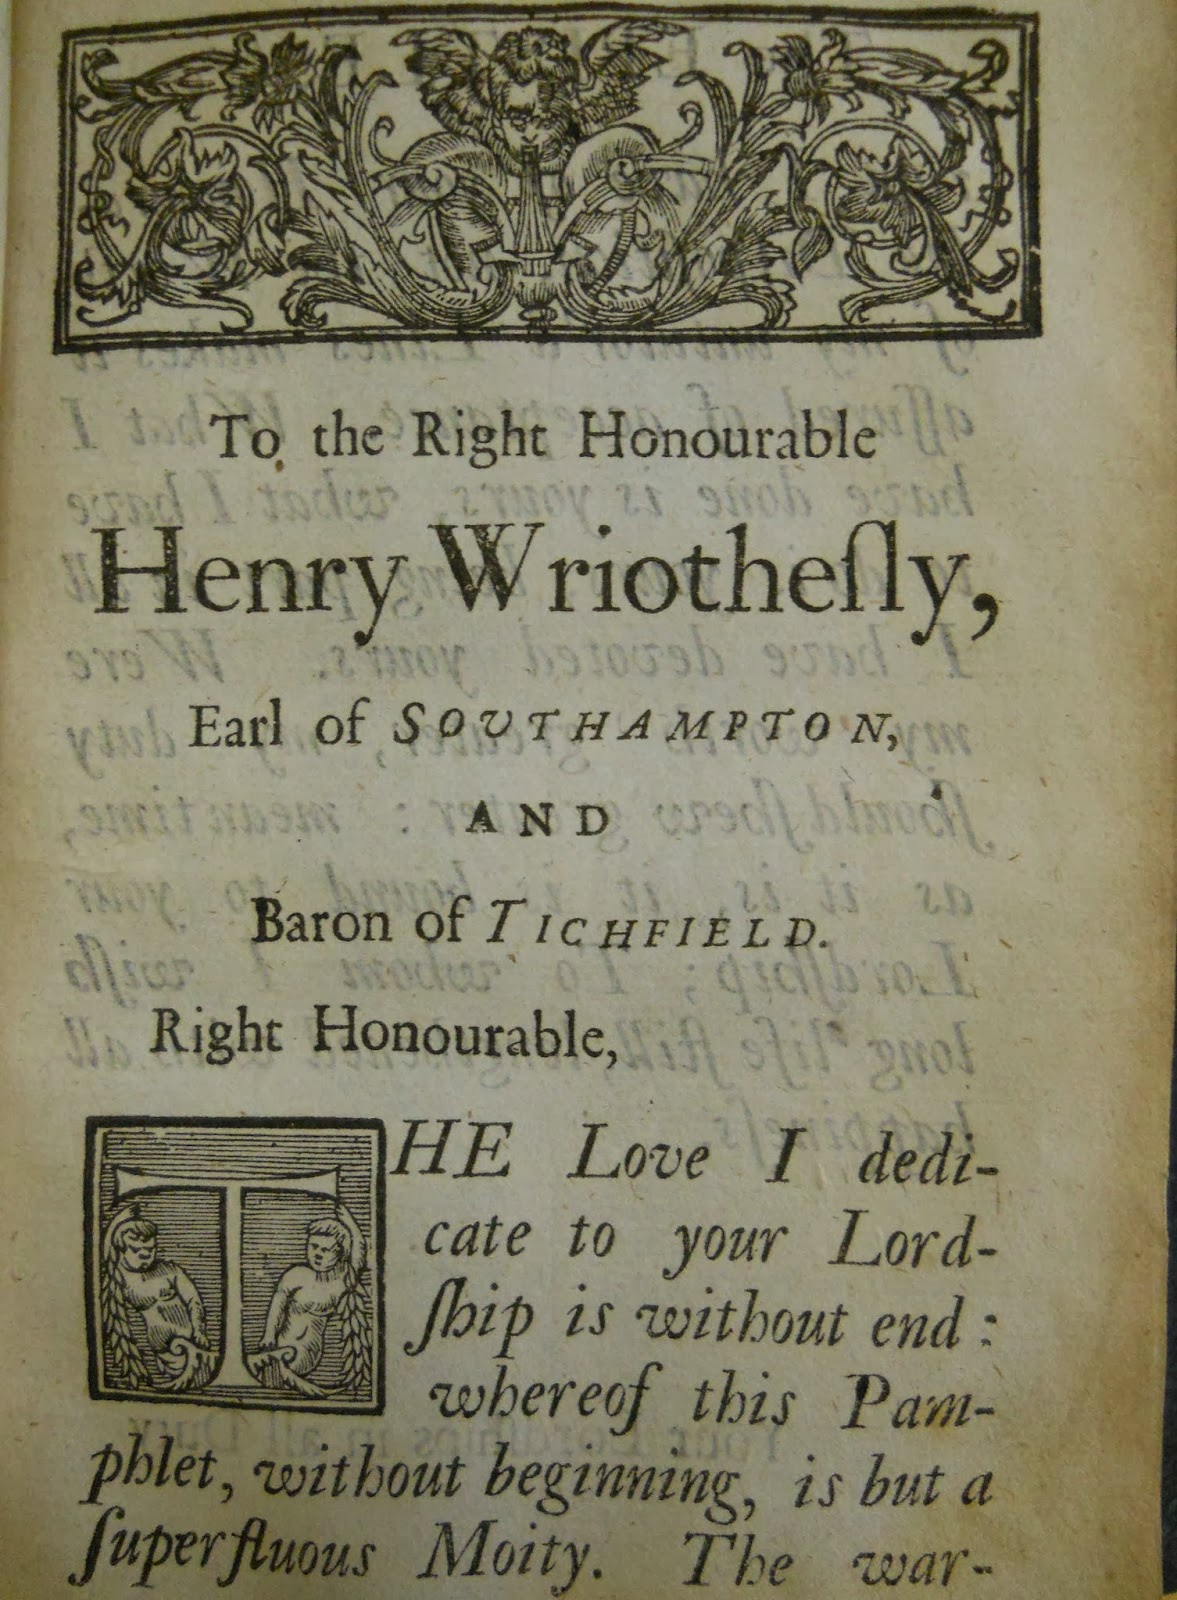 To the Right Honourable Henry Wriothesly